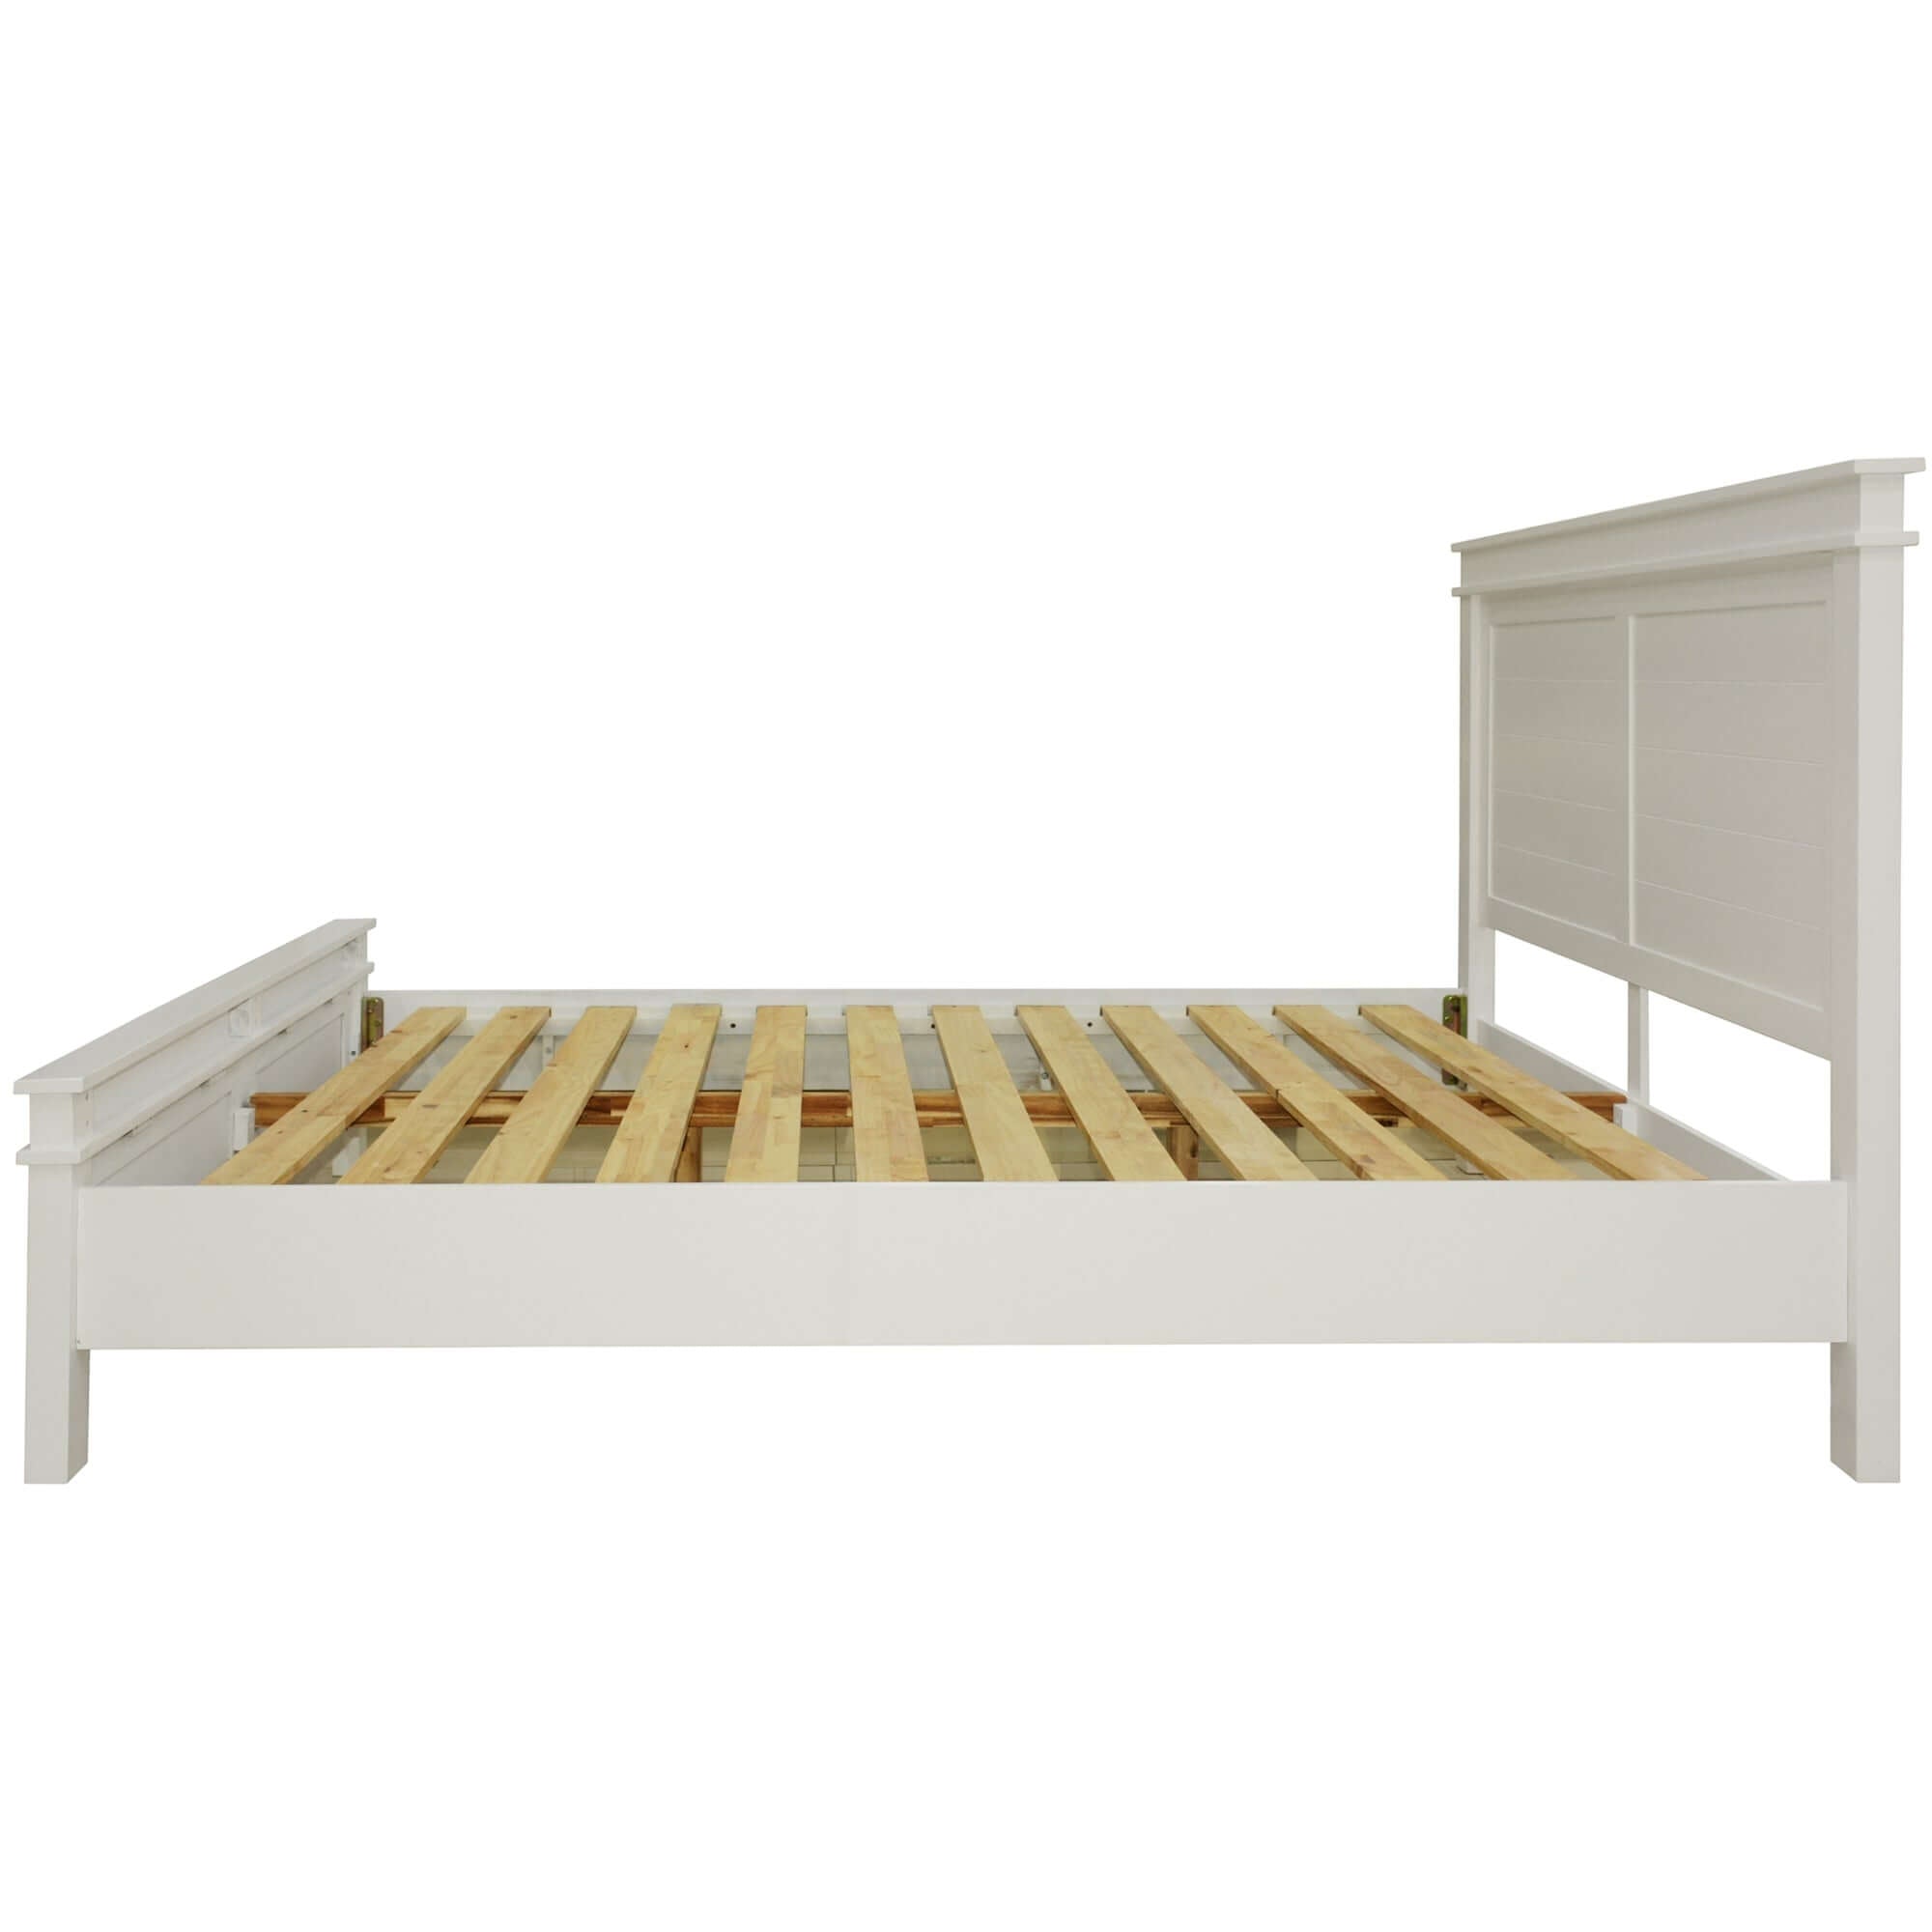 Lily King Bed Suite 5pc Set - Classic White Bedroom-Upinteriors